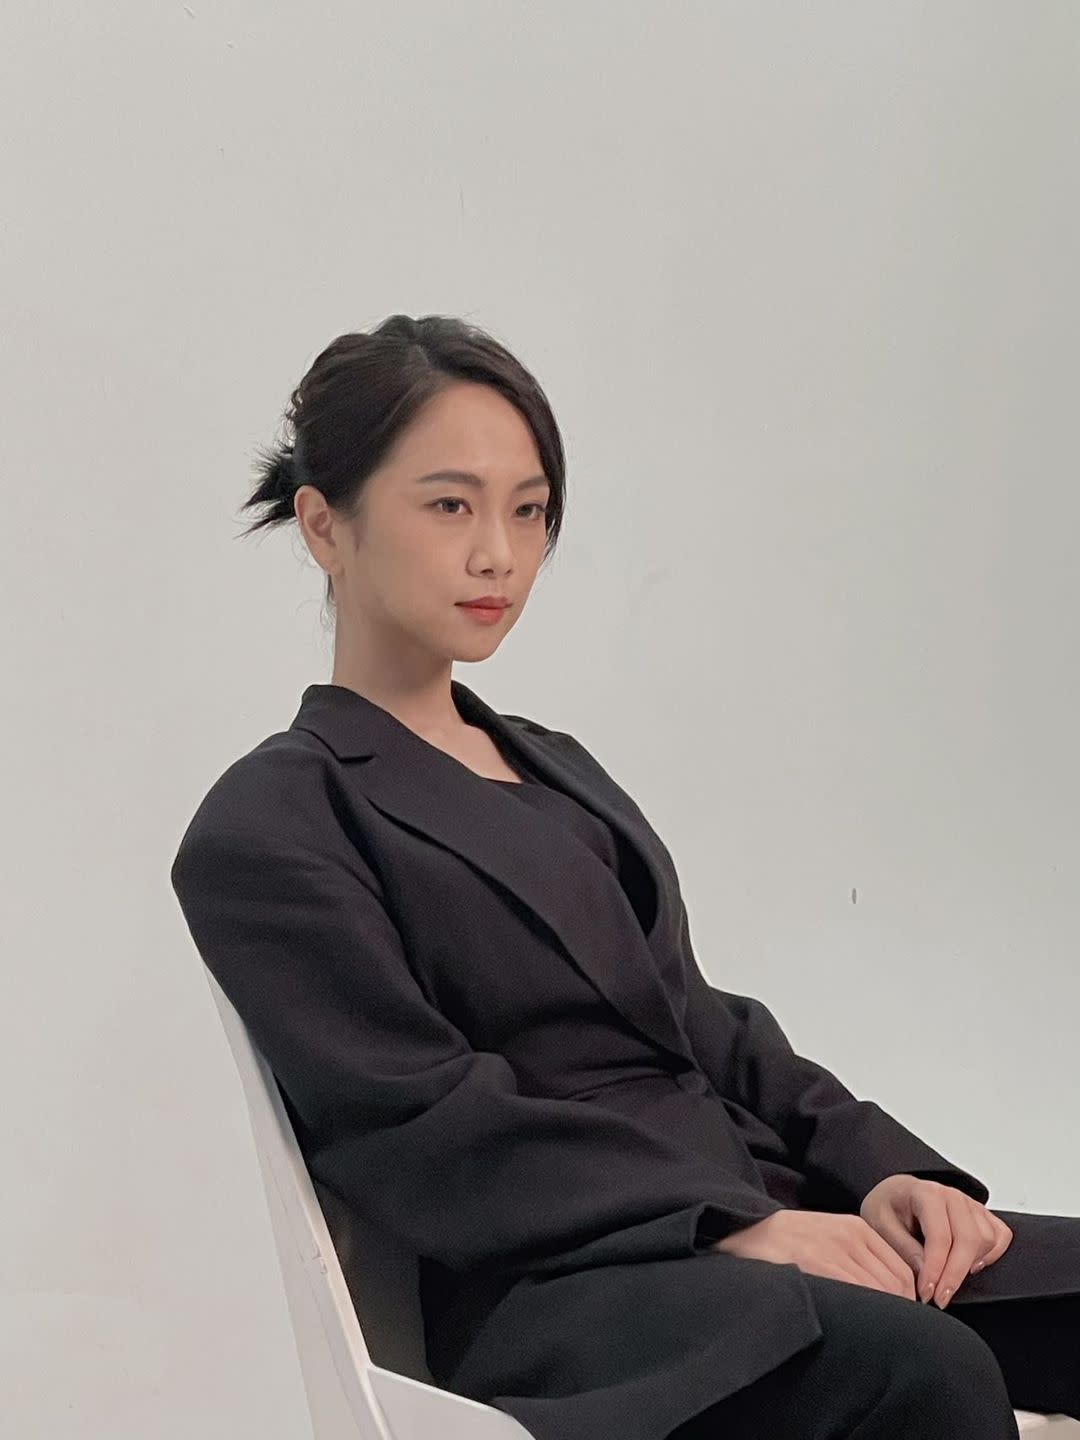 apede mode's founder sits in a chair wearing a black suit